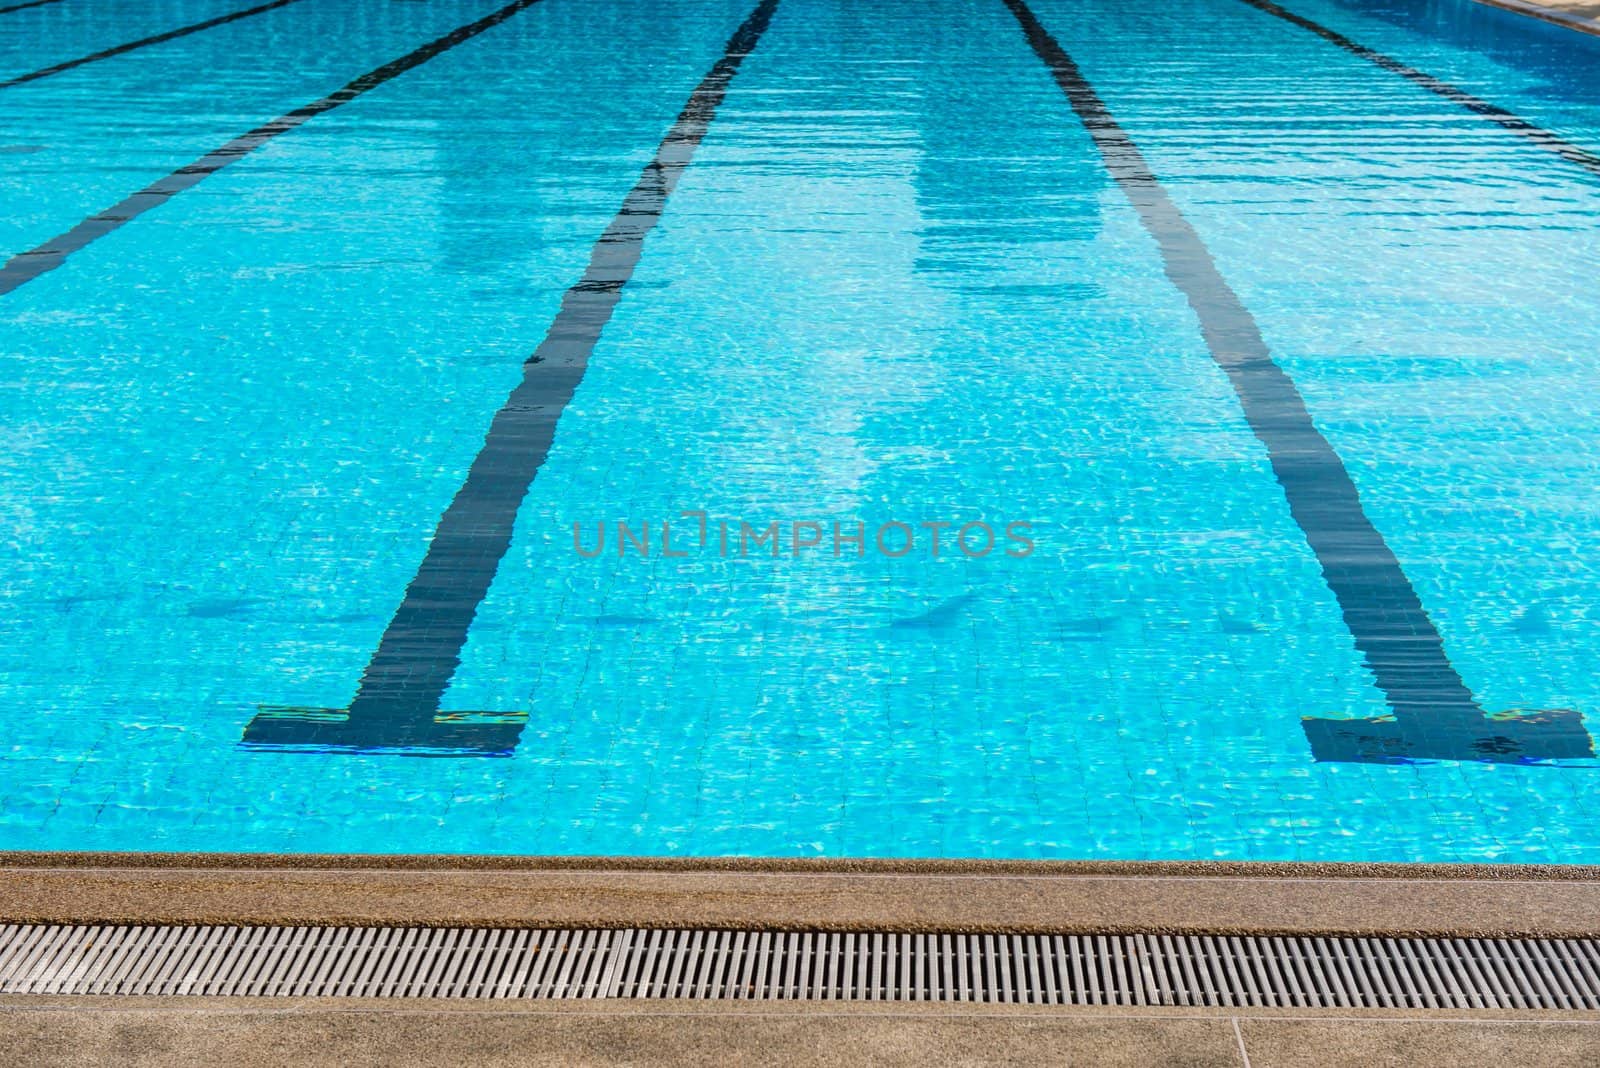 Large olympic size swimming pool with racing lanes, taken on a sunny day